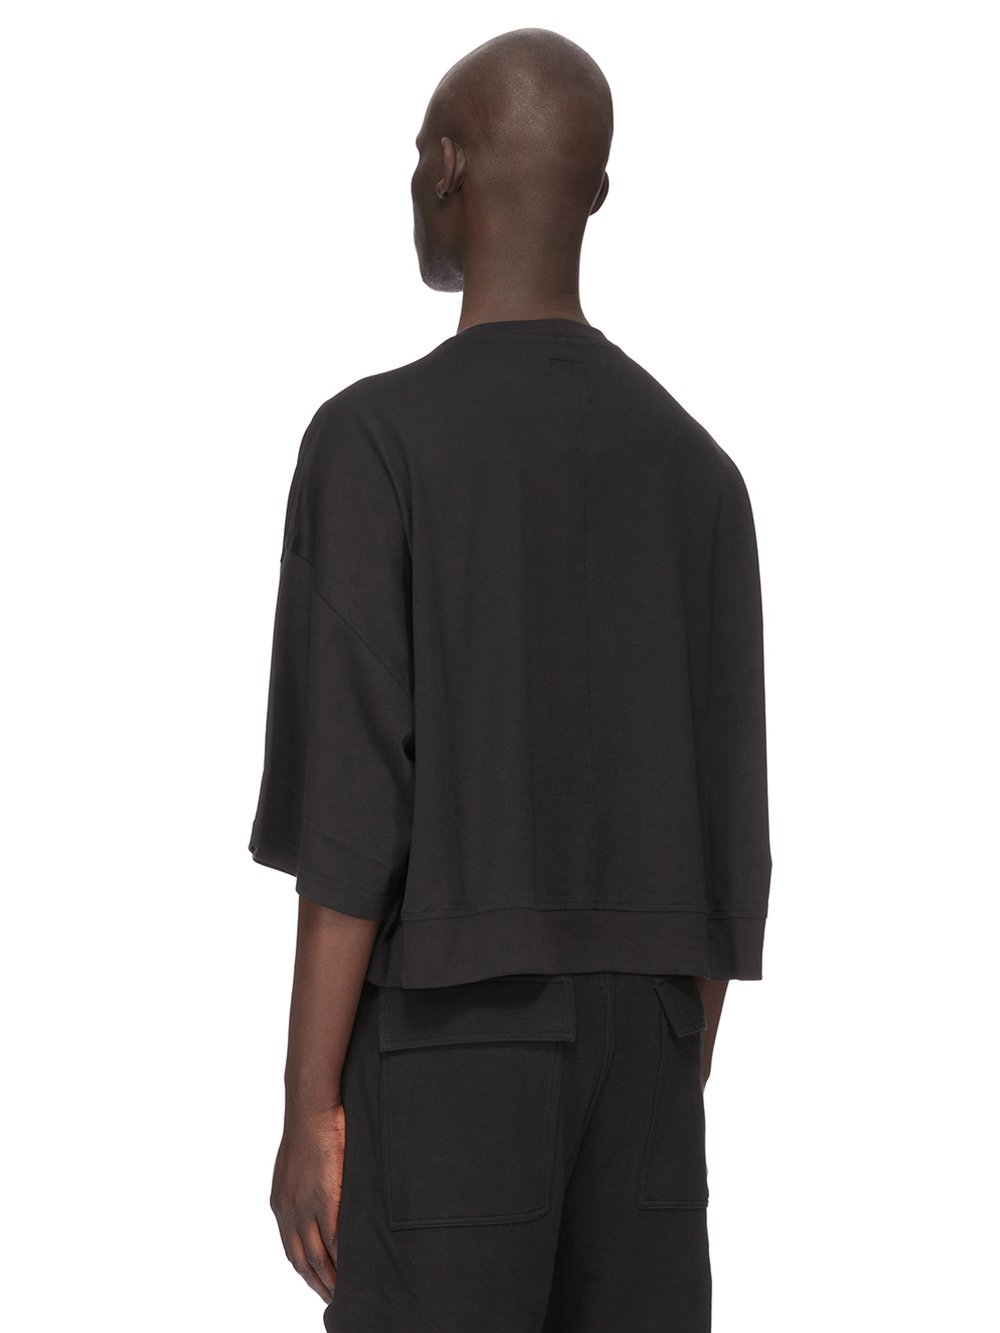 CHAMPION X RICK OWENS TOMMY T CROPPED IN BLACK MEDIUM WEIGHT COTTON JERSEY 